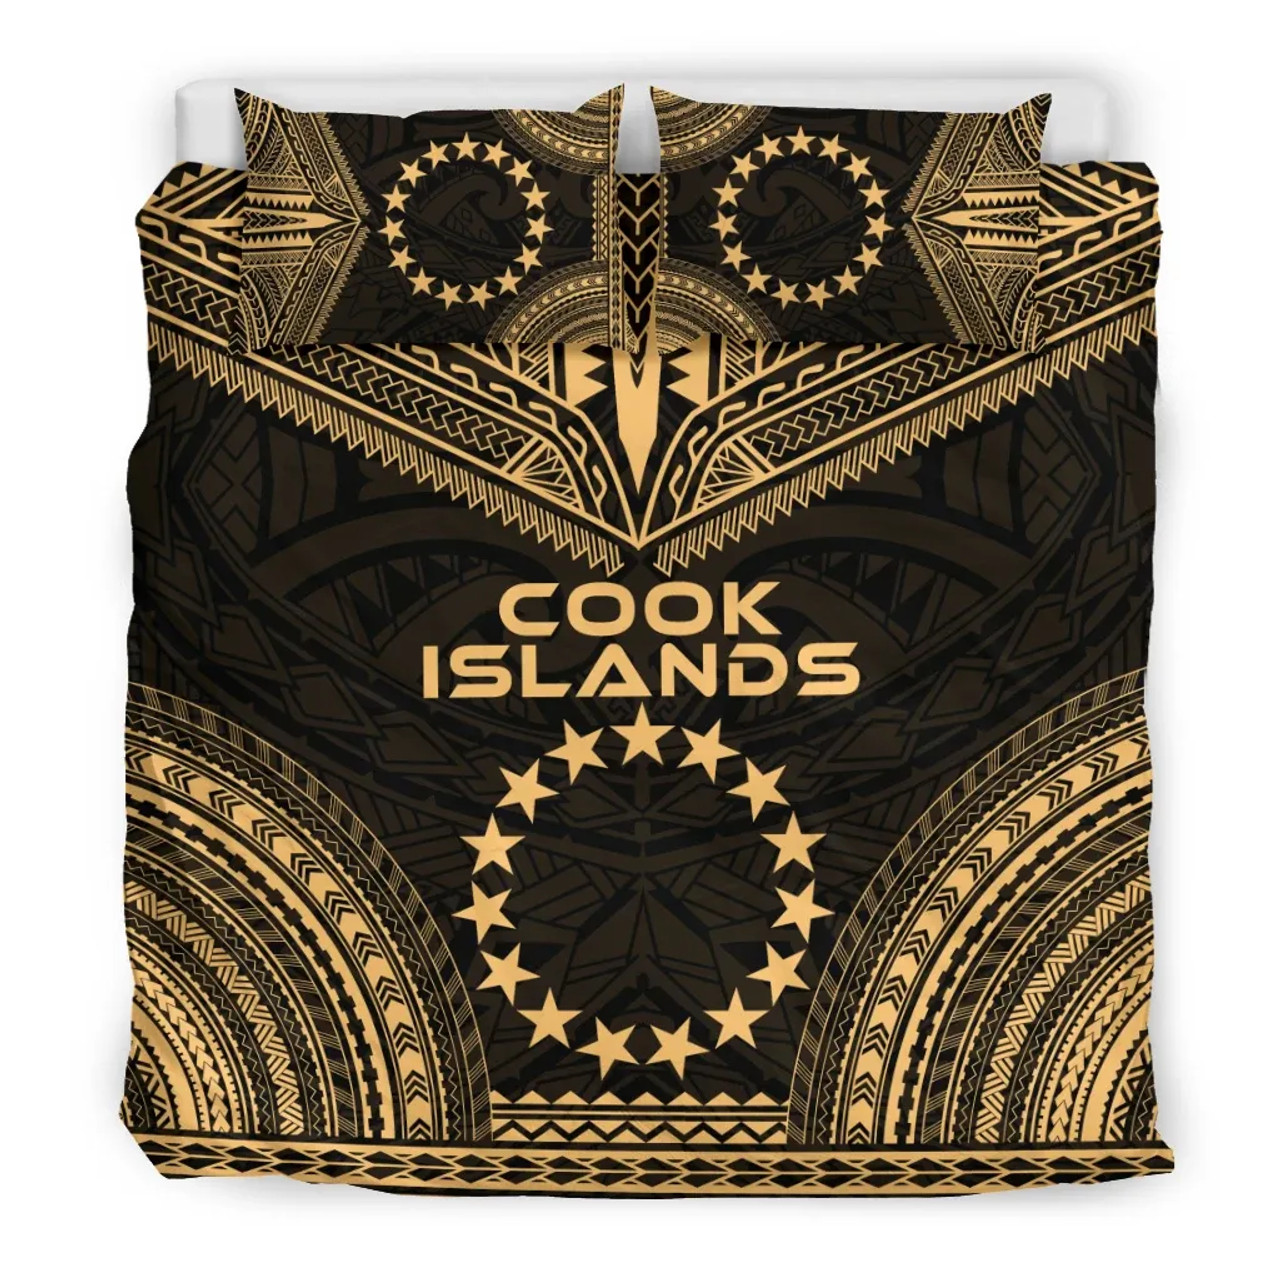 Cook Islands Polynesian Chief Duvet Cover Set - Gold Version 3